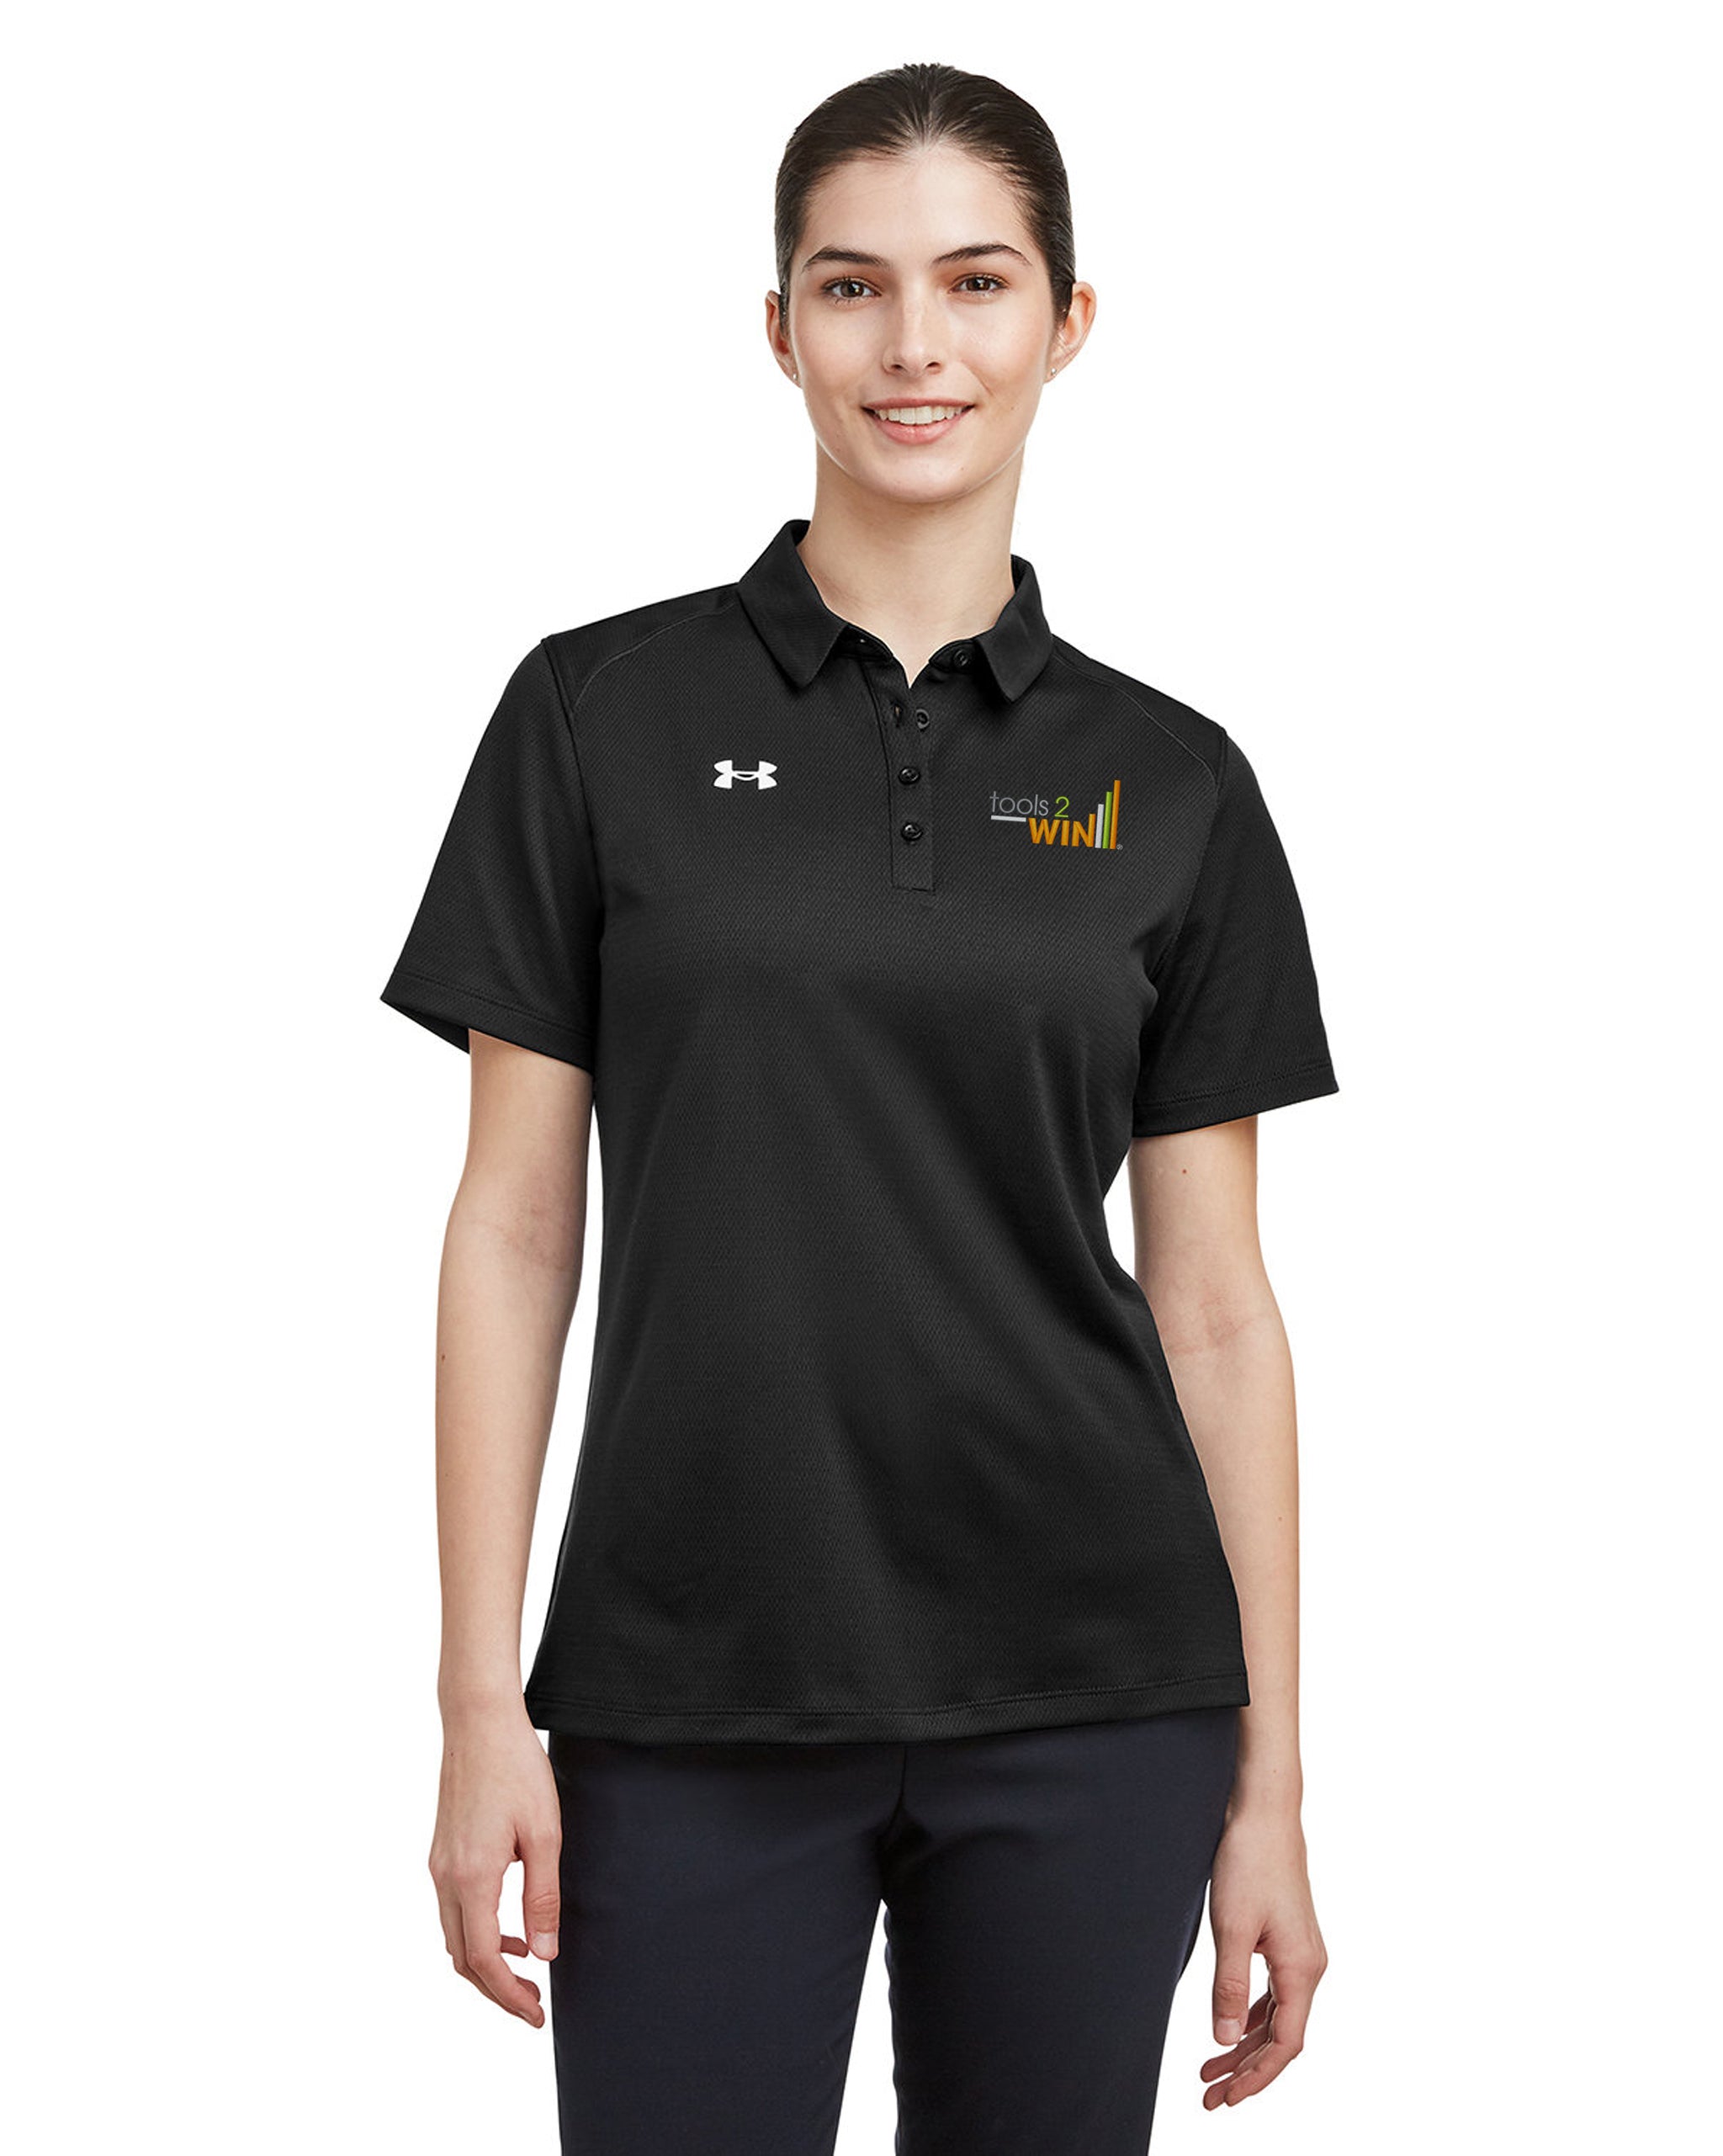 Tools2Win - Under Armour Ladies' Tech Polo - 1370431